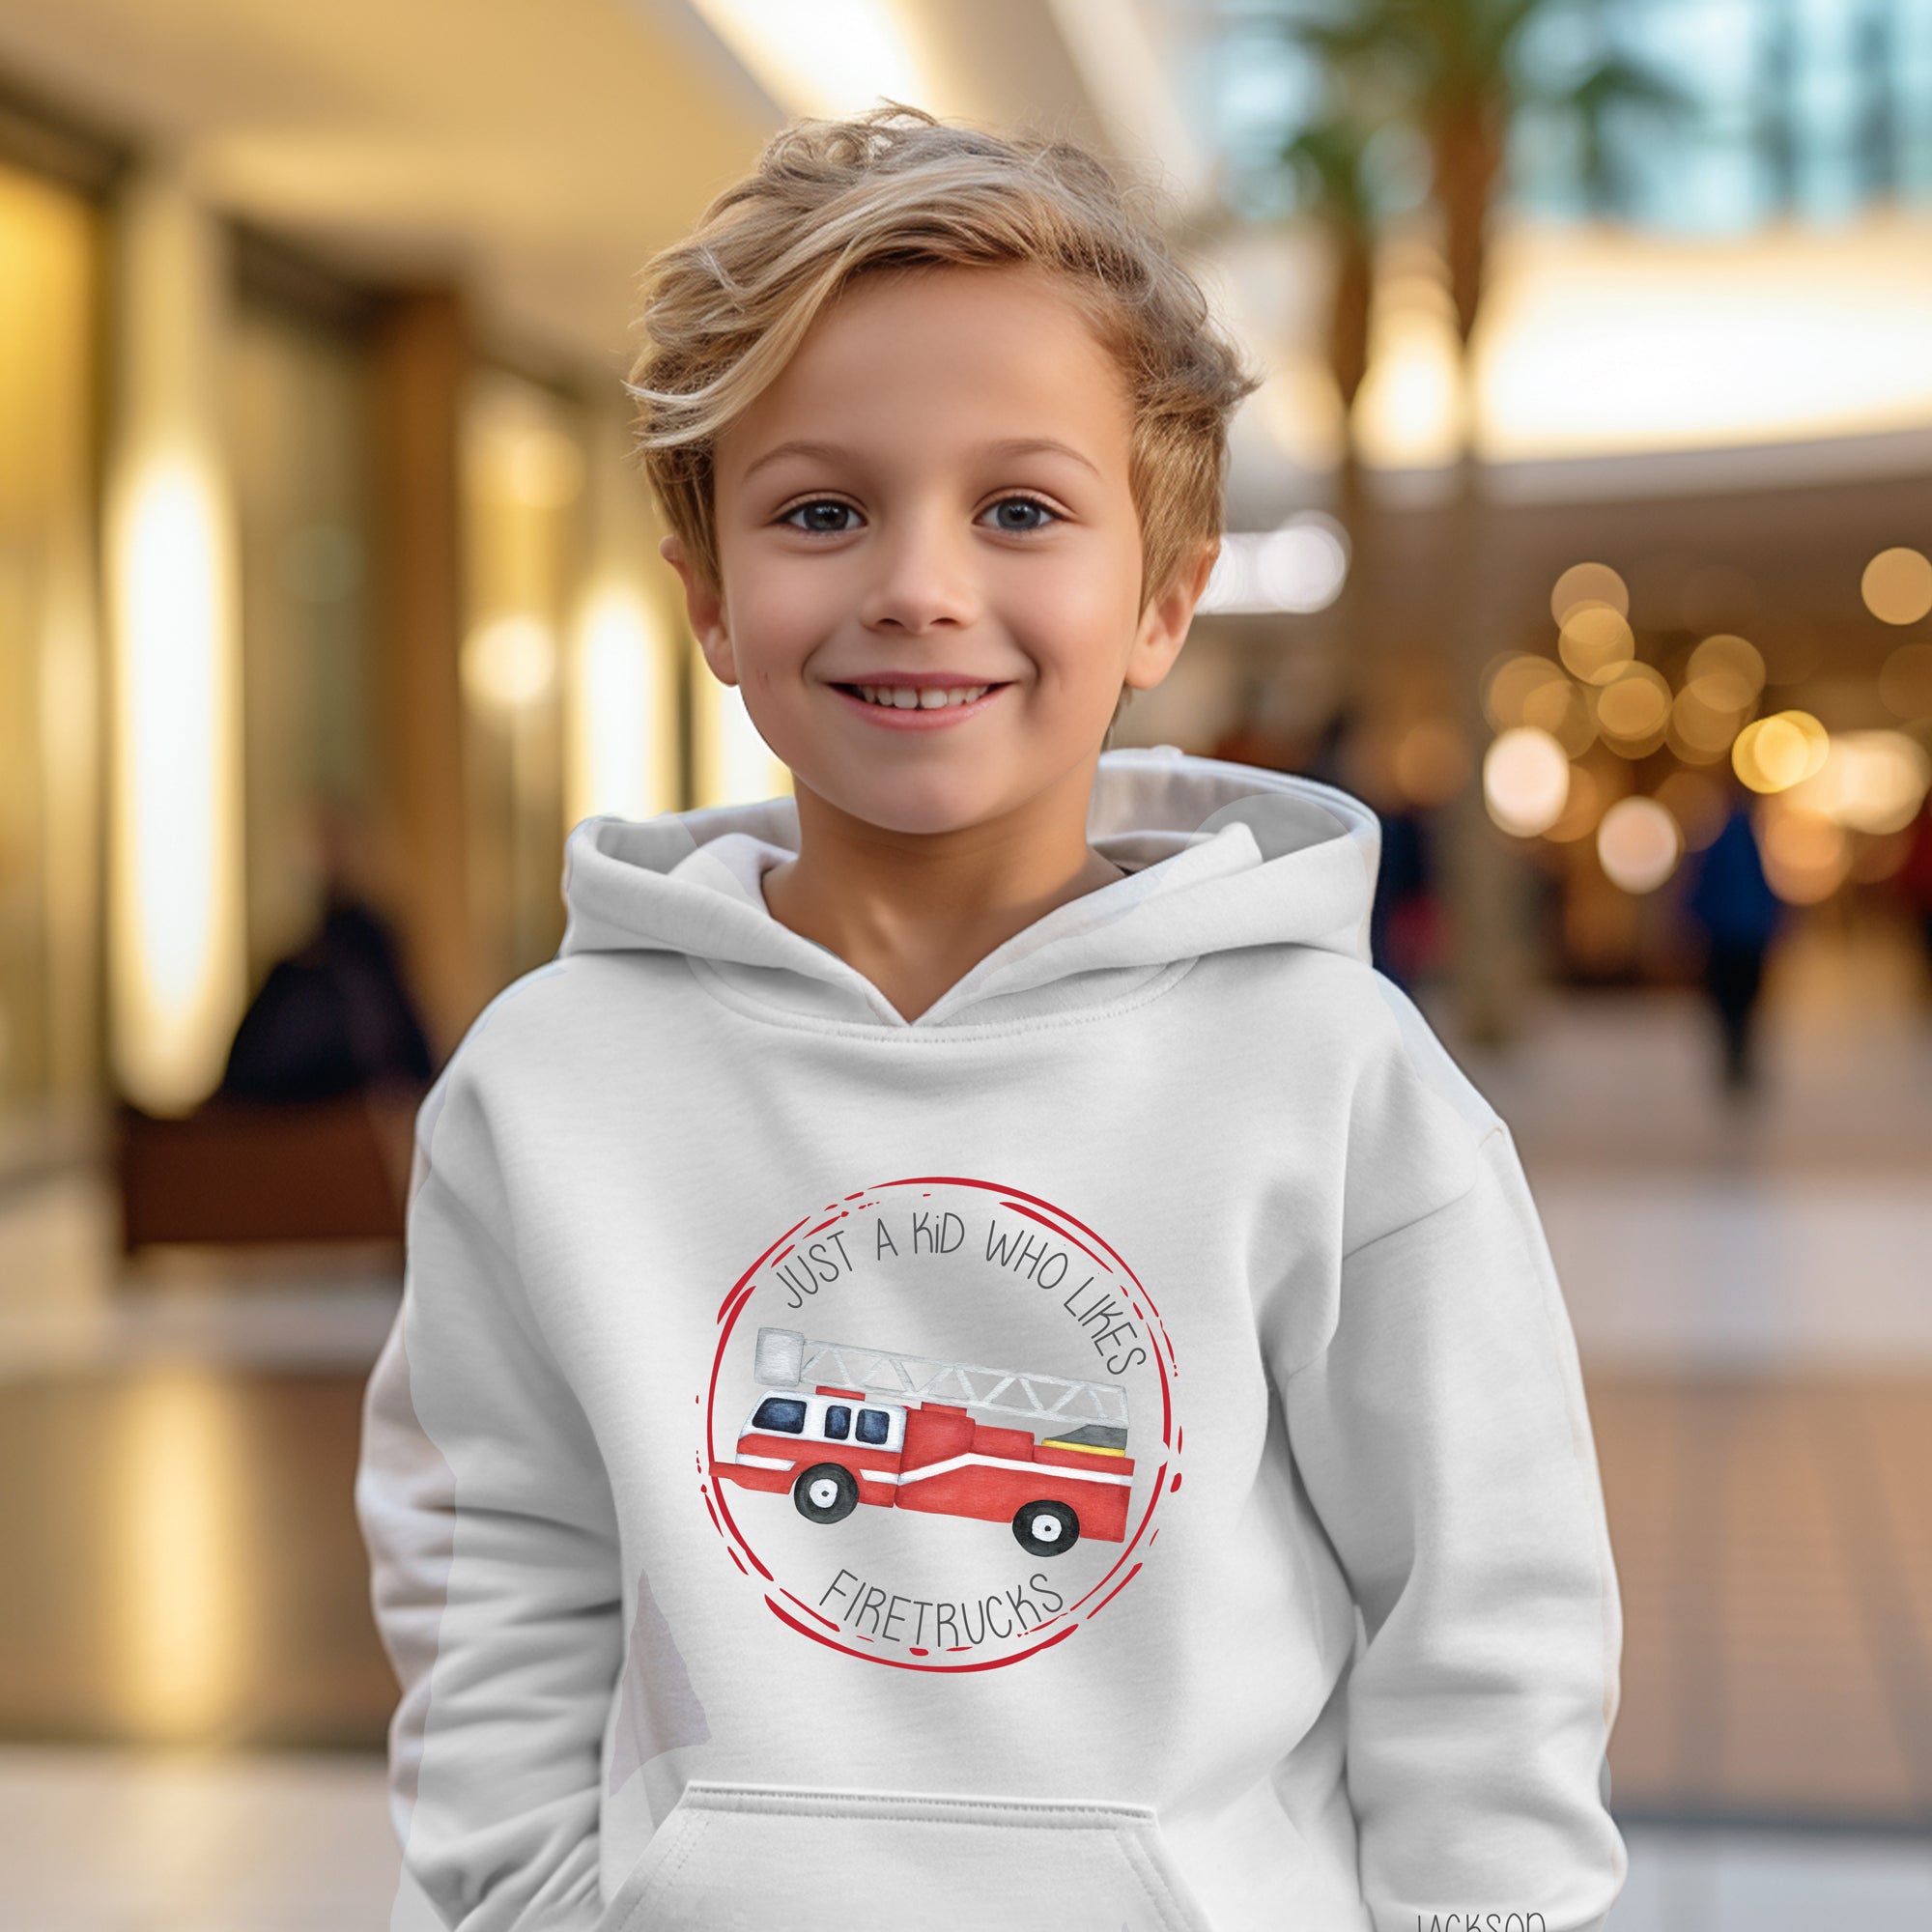 Just a Kid who likes FIRETRUCKS - Personalized Apparel